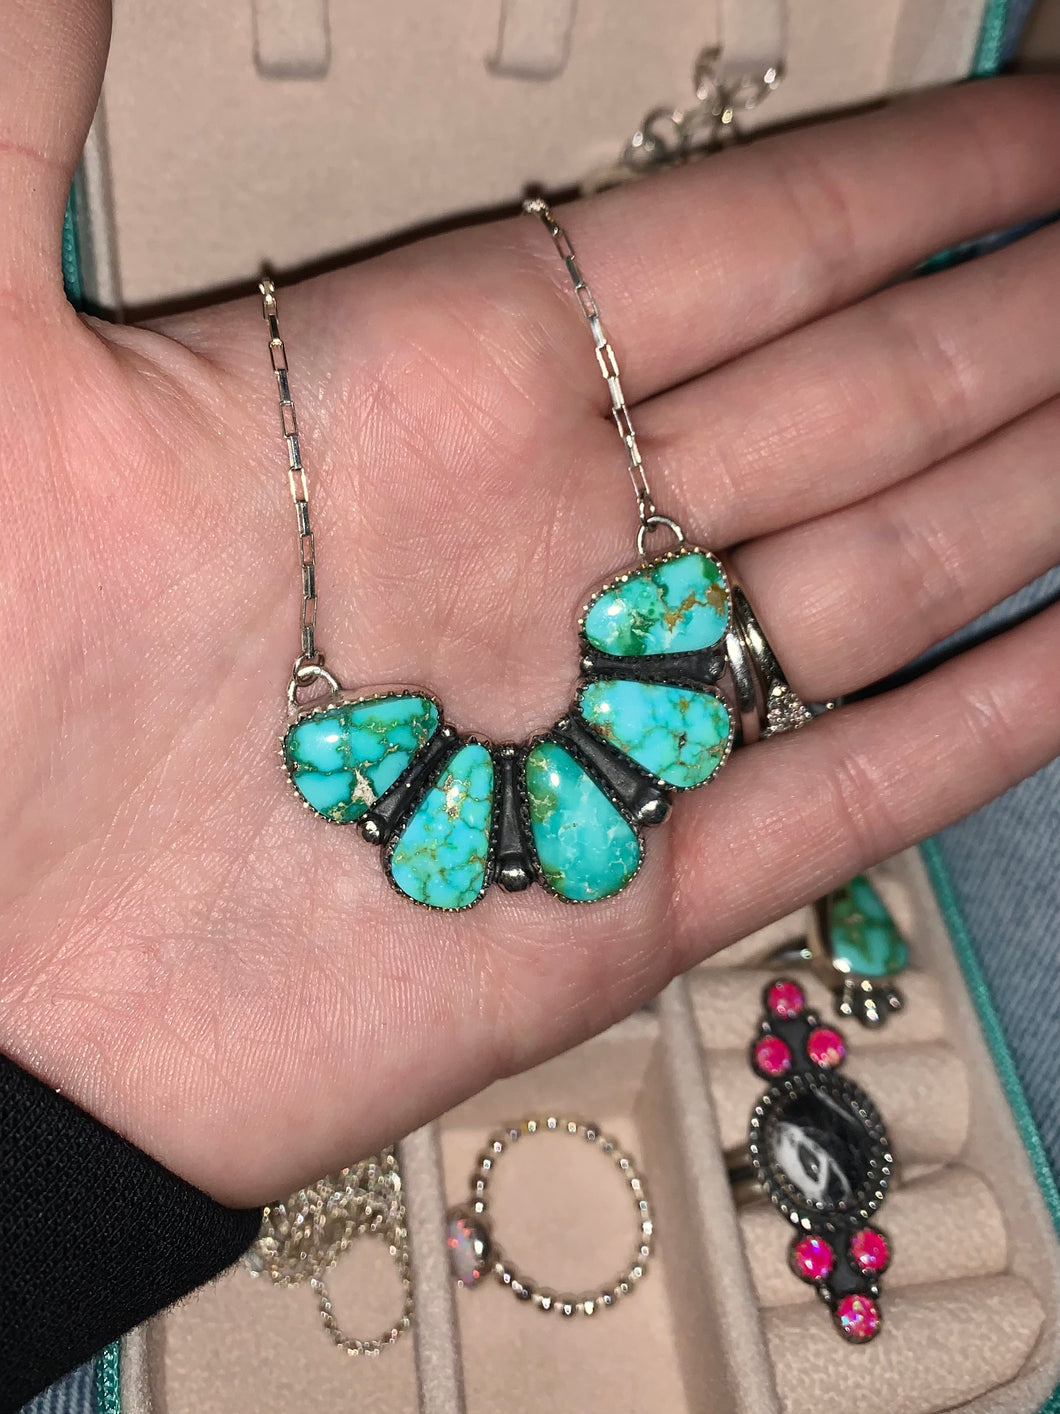 Sonoran Mountain Turquoise necklace